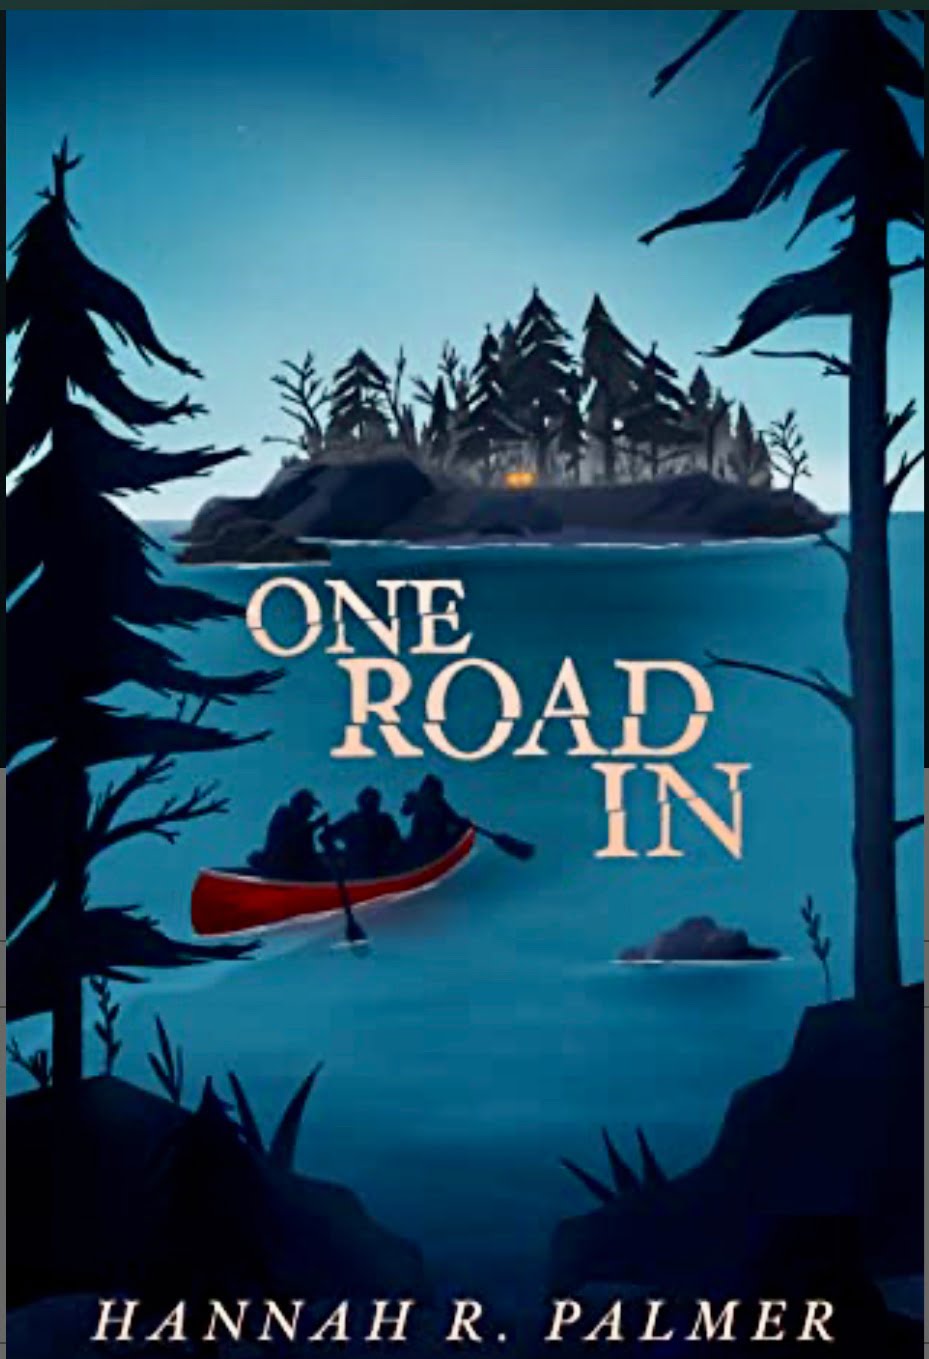 ONE ROAD IN BY HANNAH R. PALMER – BOOK REVIEW